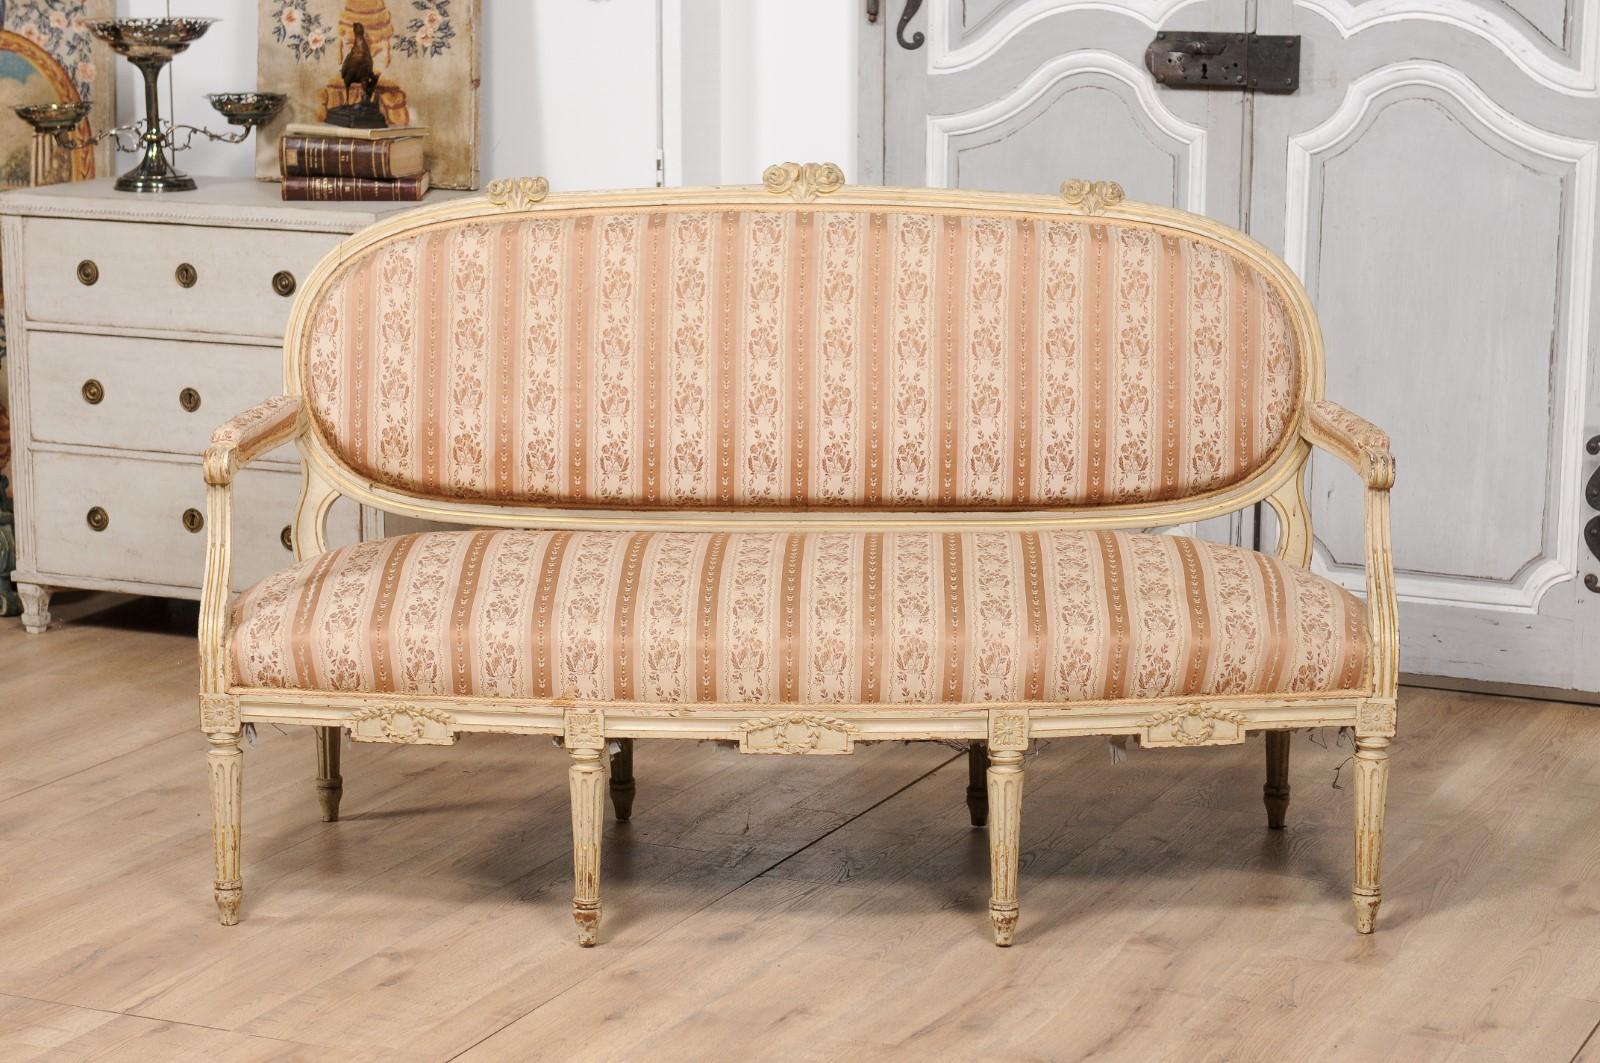 1790s Louis XVI Period French Painted Sofa with Oval Back and Carved Foliage For Sale 1